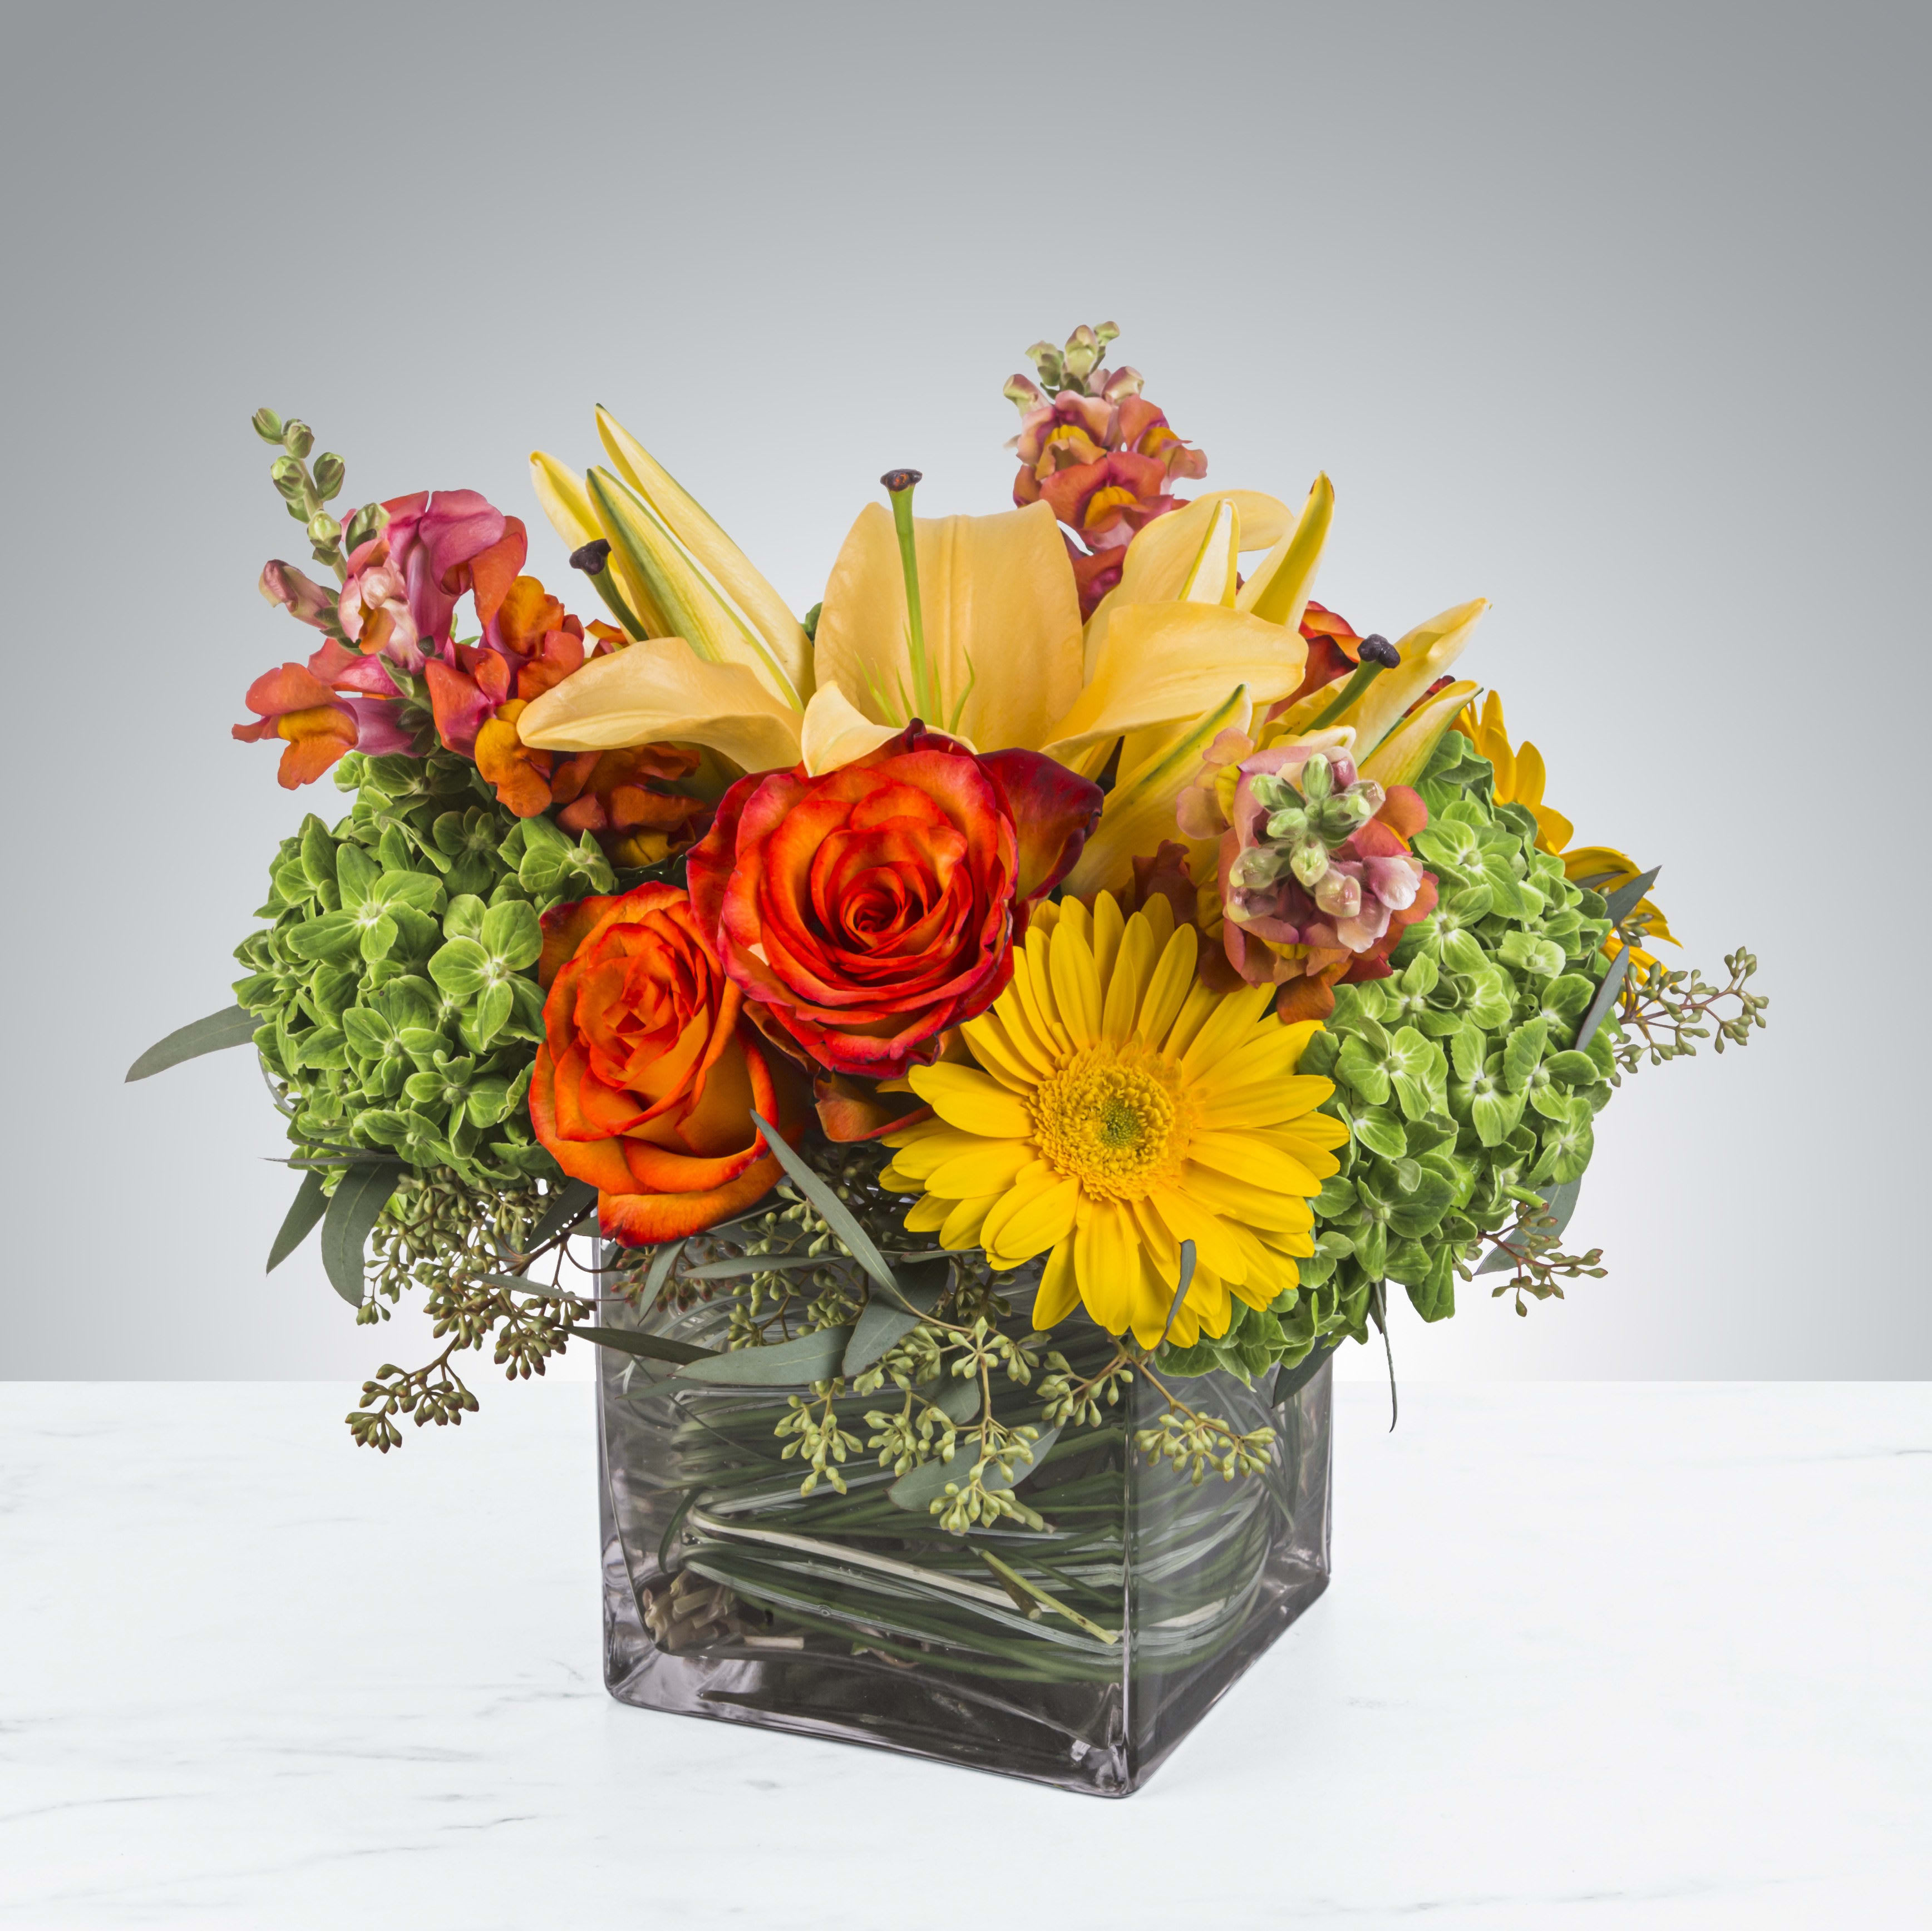 Citrus Splash by BloomNation™ - This bright yellow, green, and orange arrangement includes roses, daisies, and lilies. Citrus Splash by BloomNation™ is the perfect gift for a birthday, thank you or any occasion,    APPROXIMATE DIMENSIONS 14&quot; W X 14&quot; H